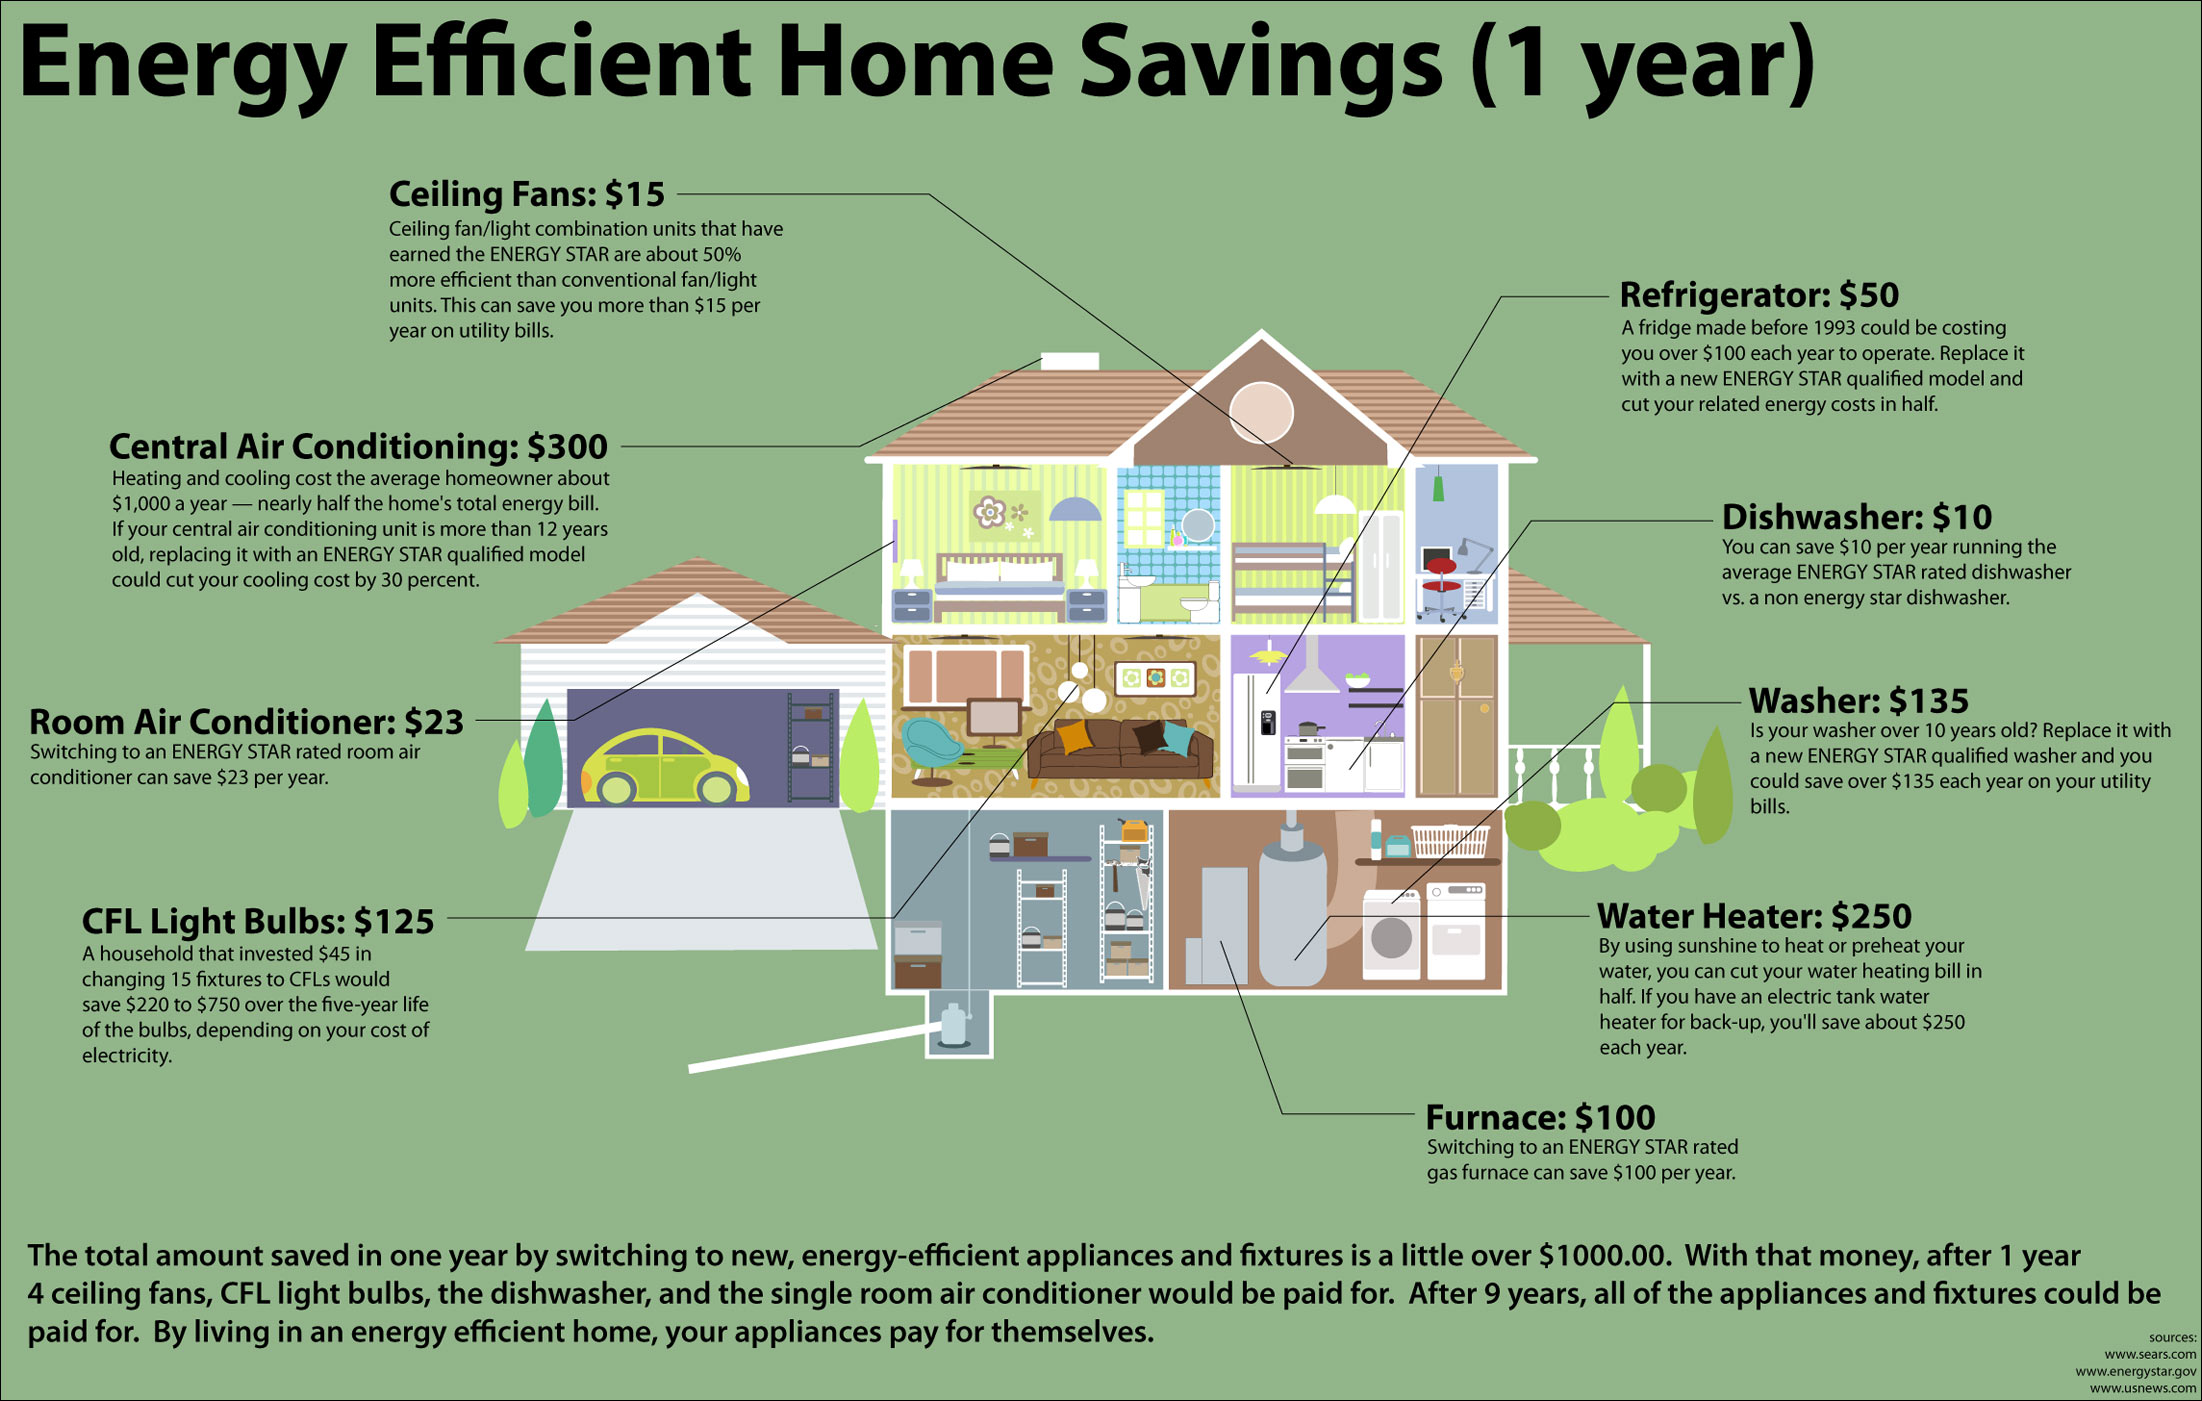 https://carbonvalleyhome.com/wp-content/uploads/2016/01/Home-energy-efficiency.jpg